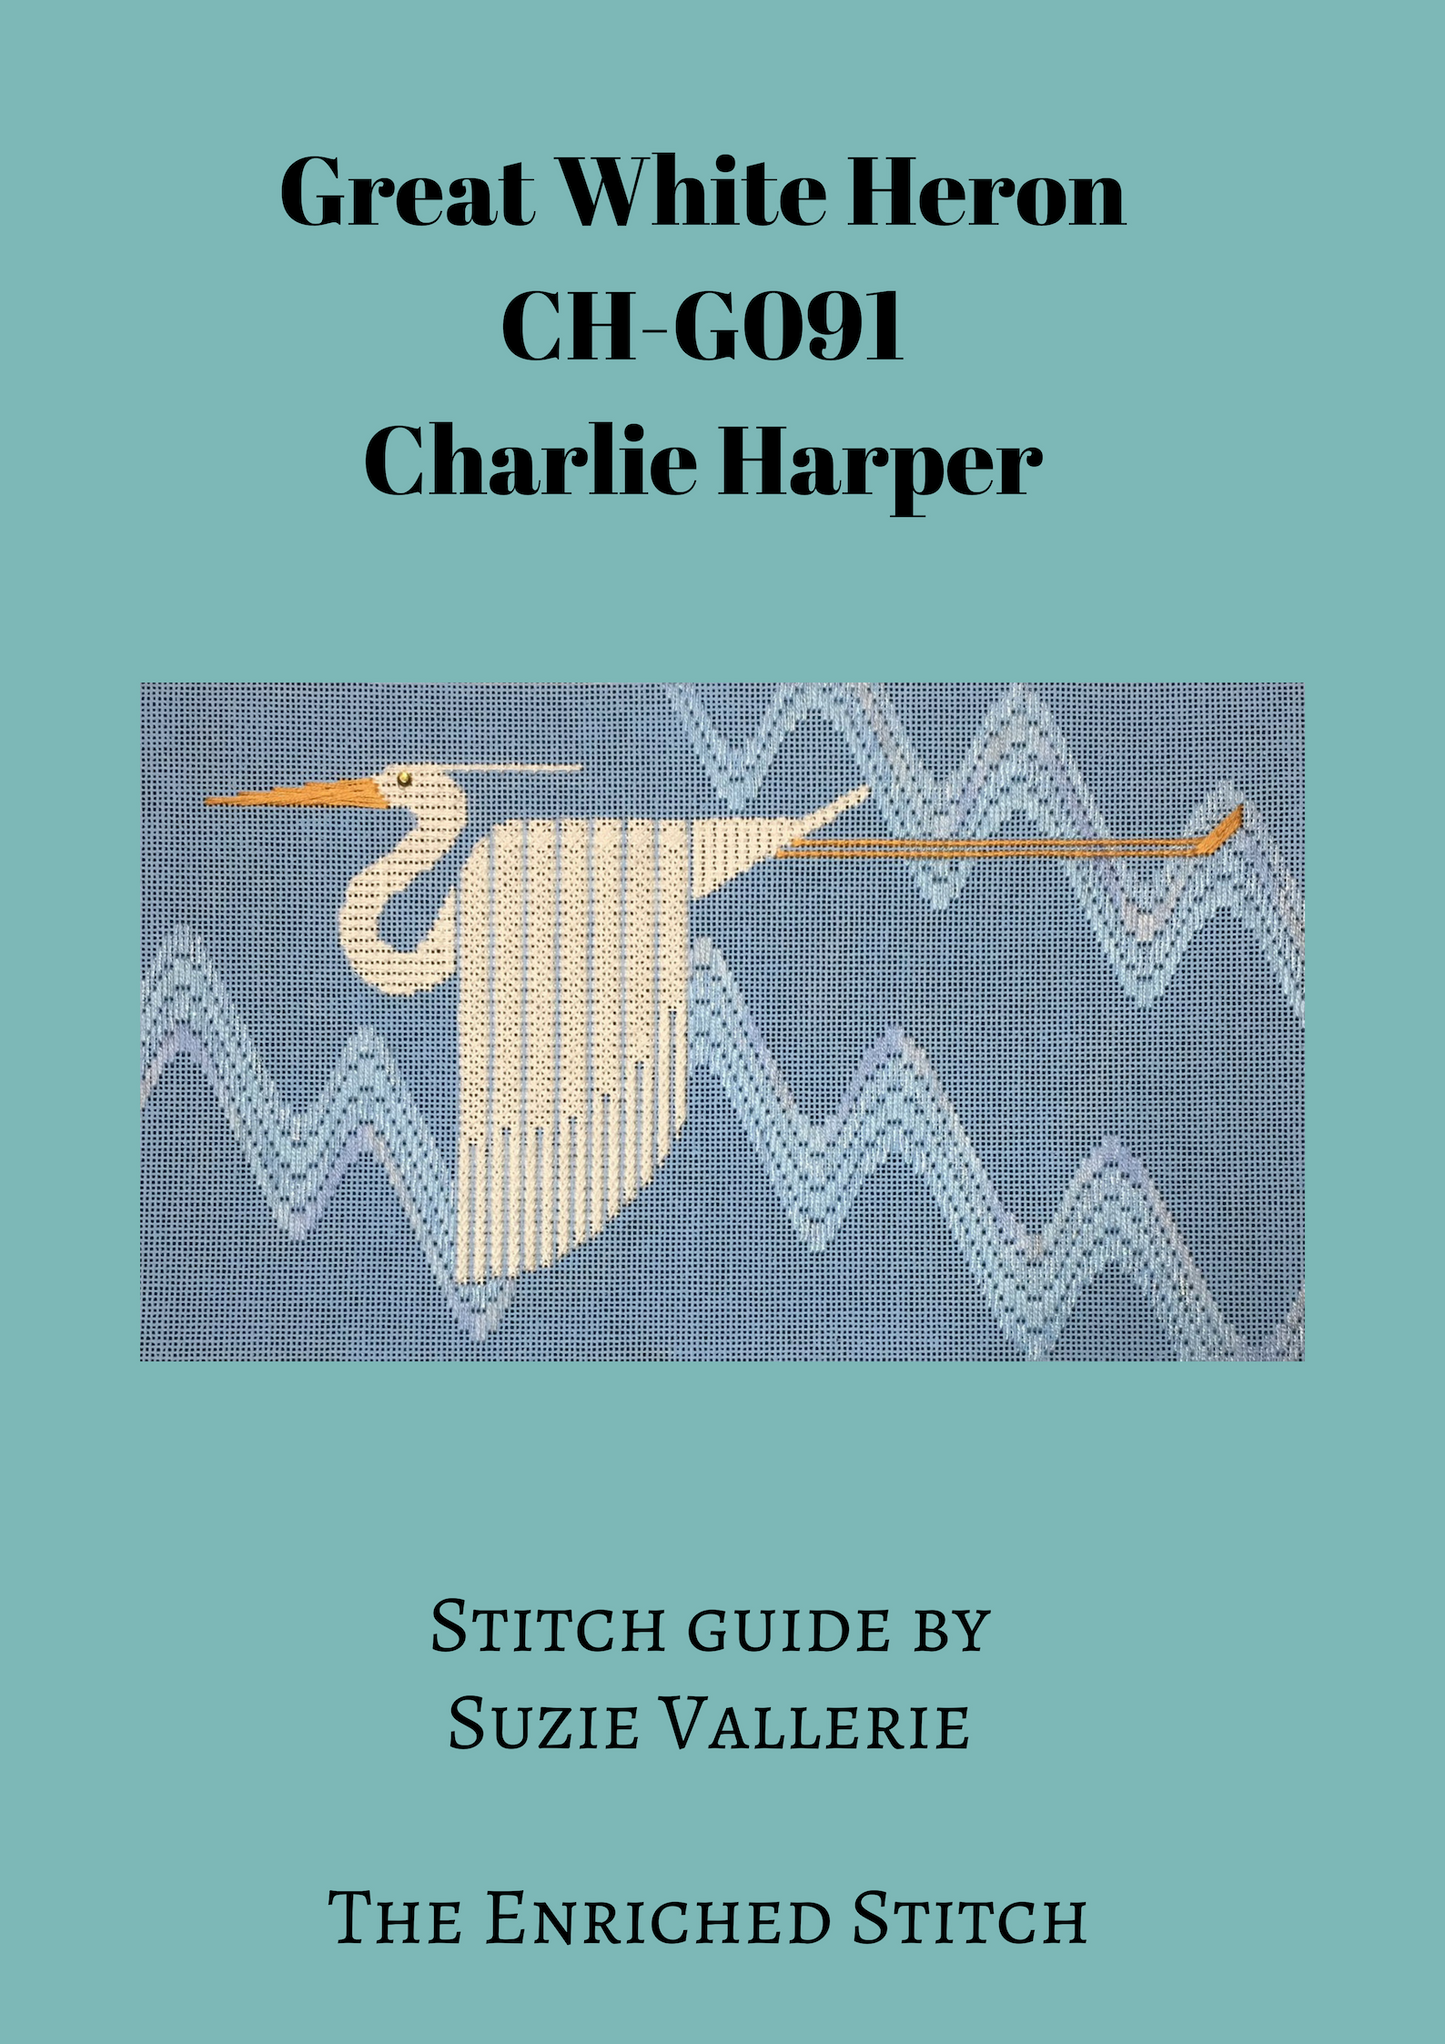 Great White Heron Stitch Guide